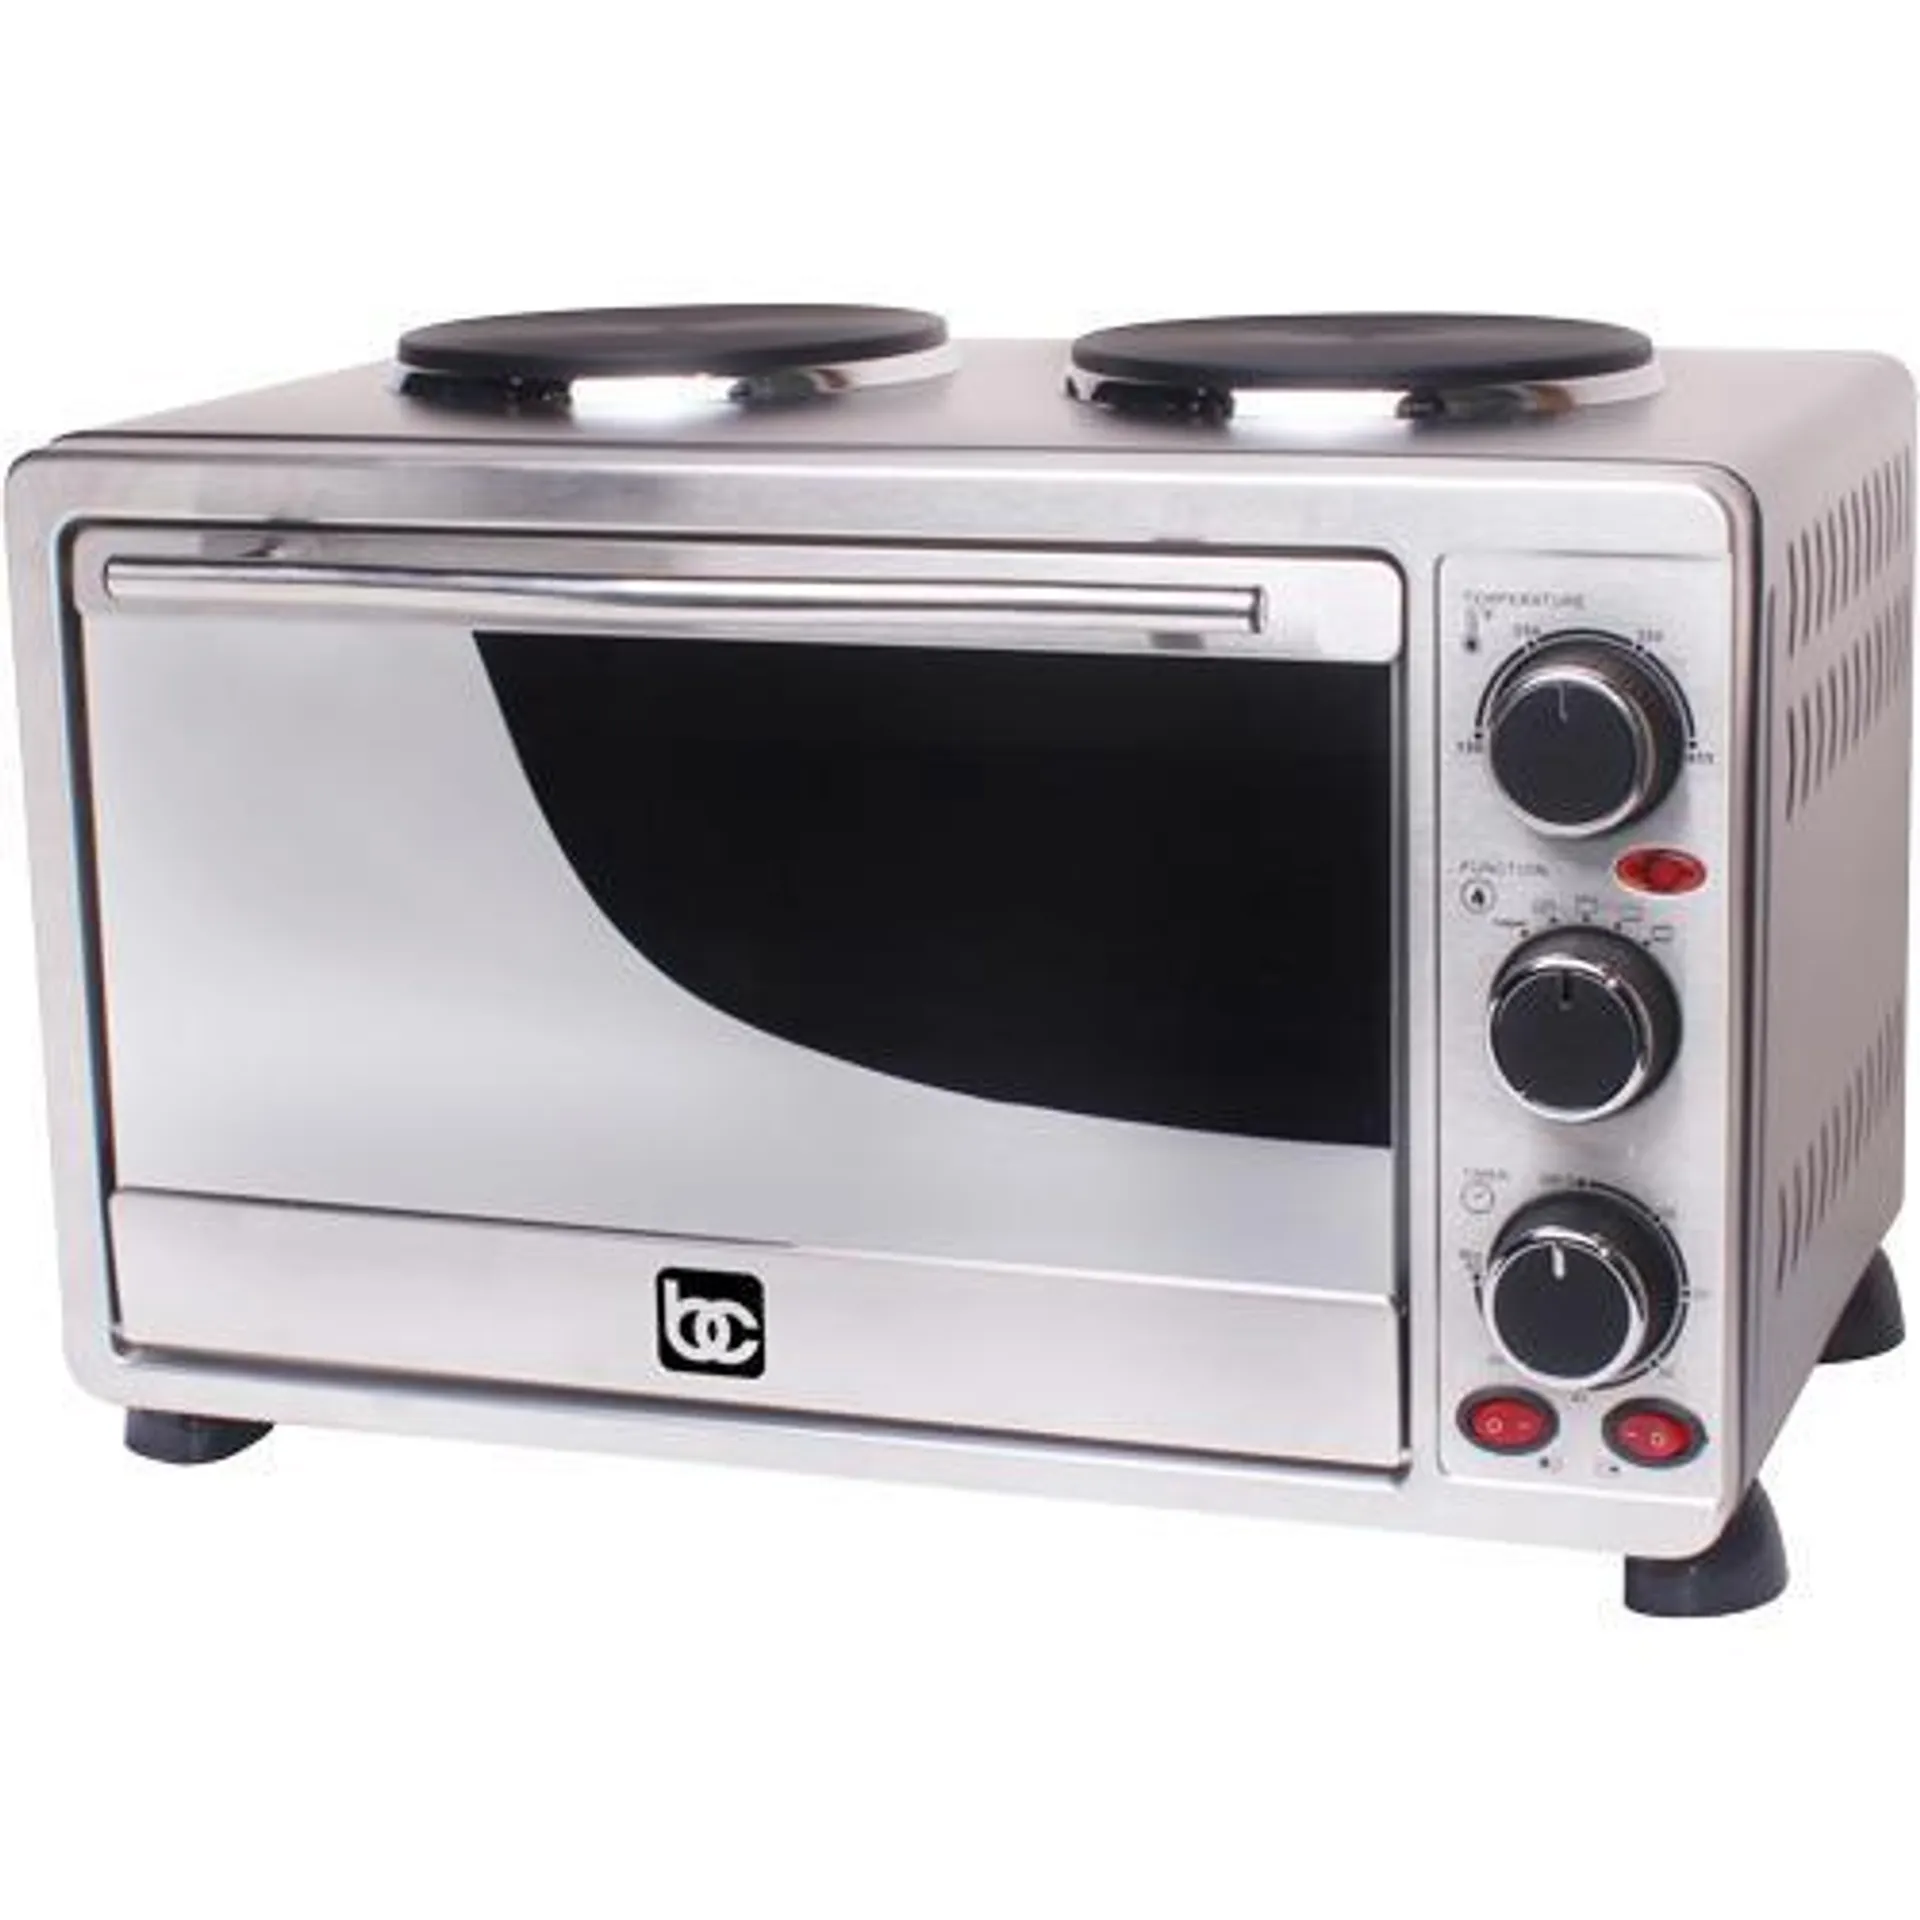 Toaster Oven With Double Burners